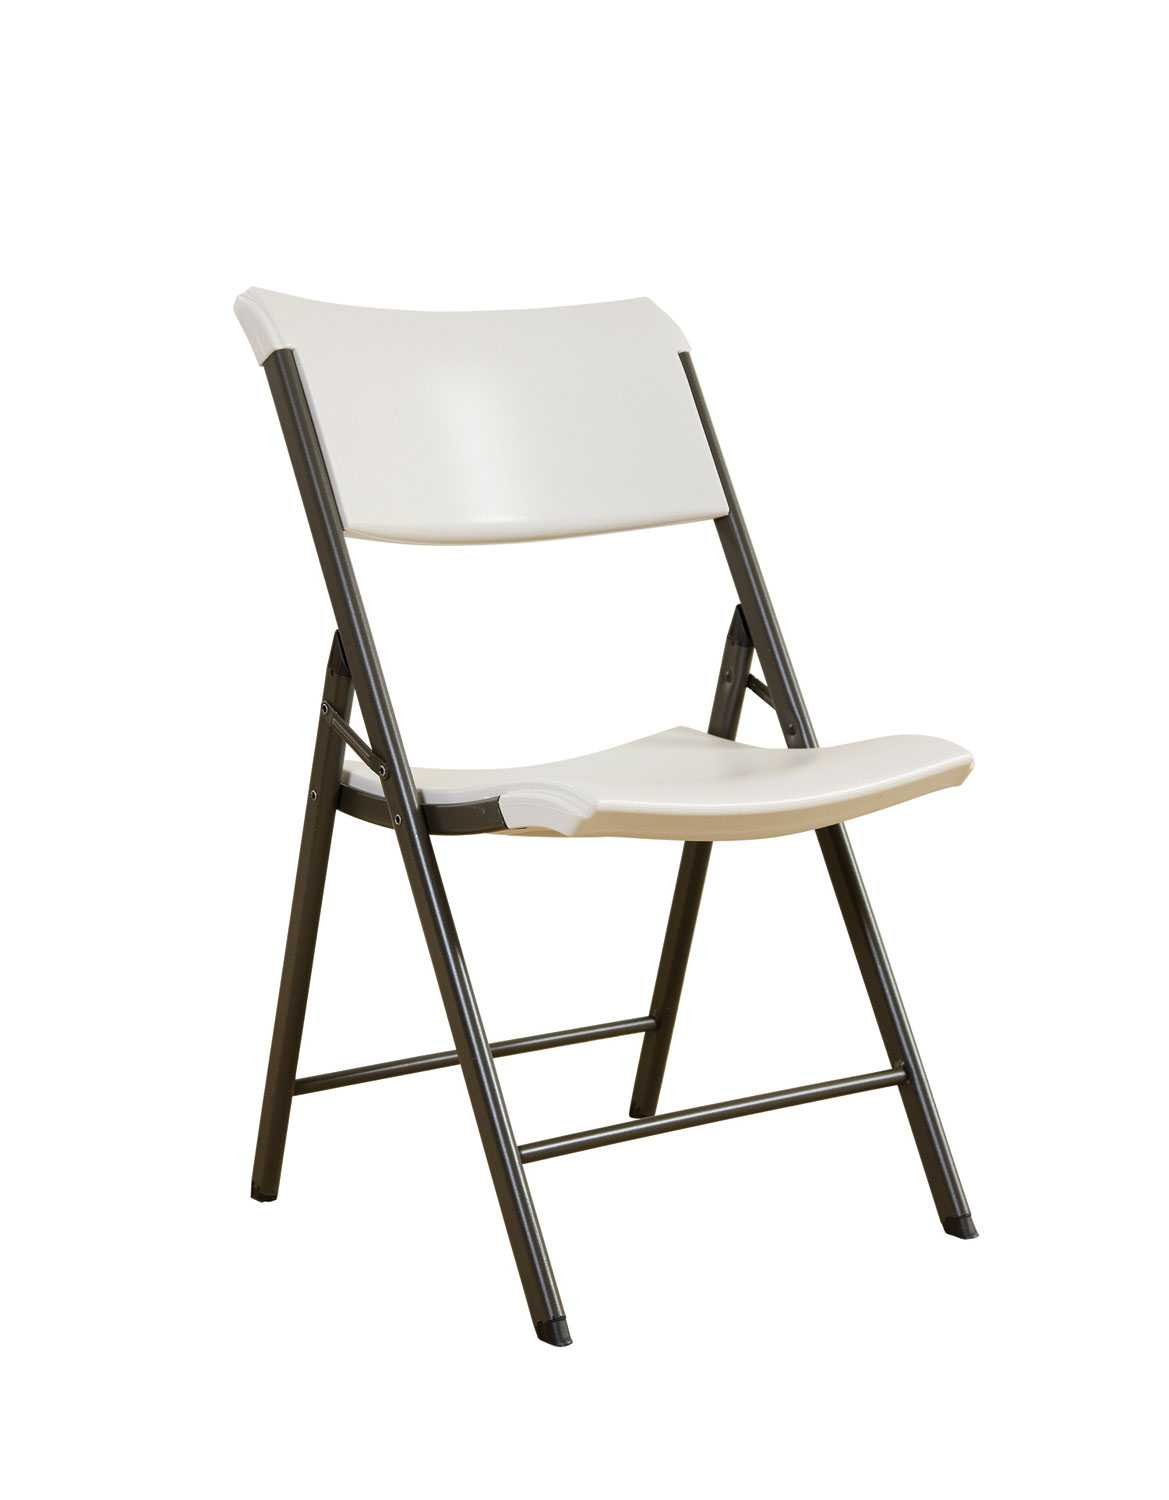 Lifetime 480074 Contemporary Folding Chair, Almond with Bronze Steel Frame, 4-Pack